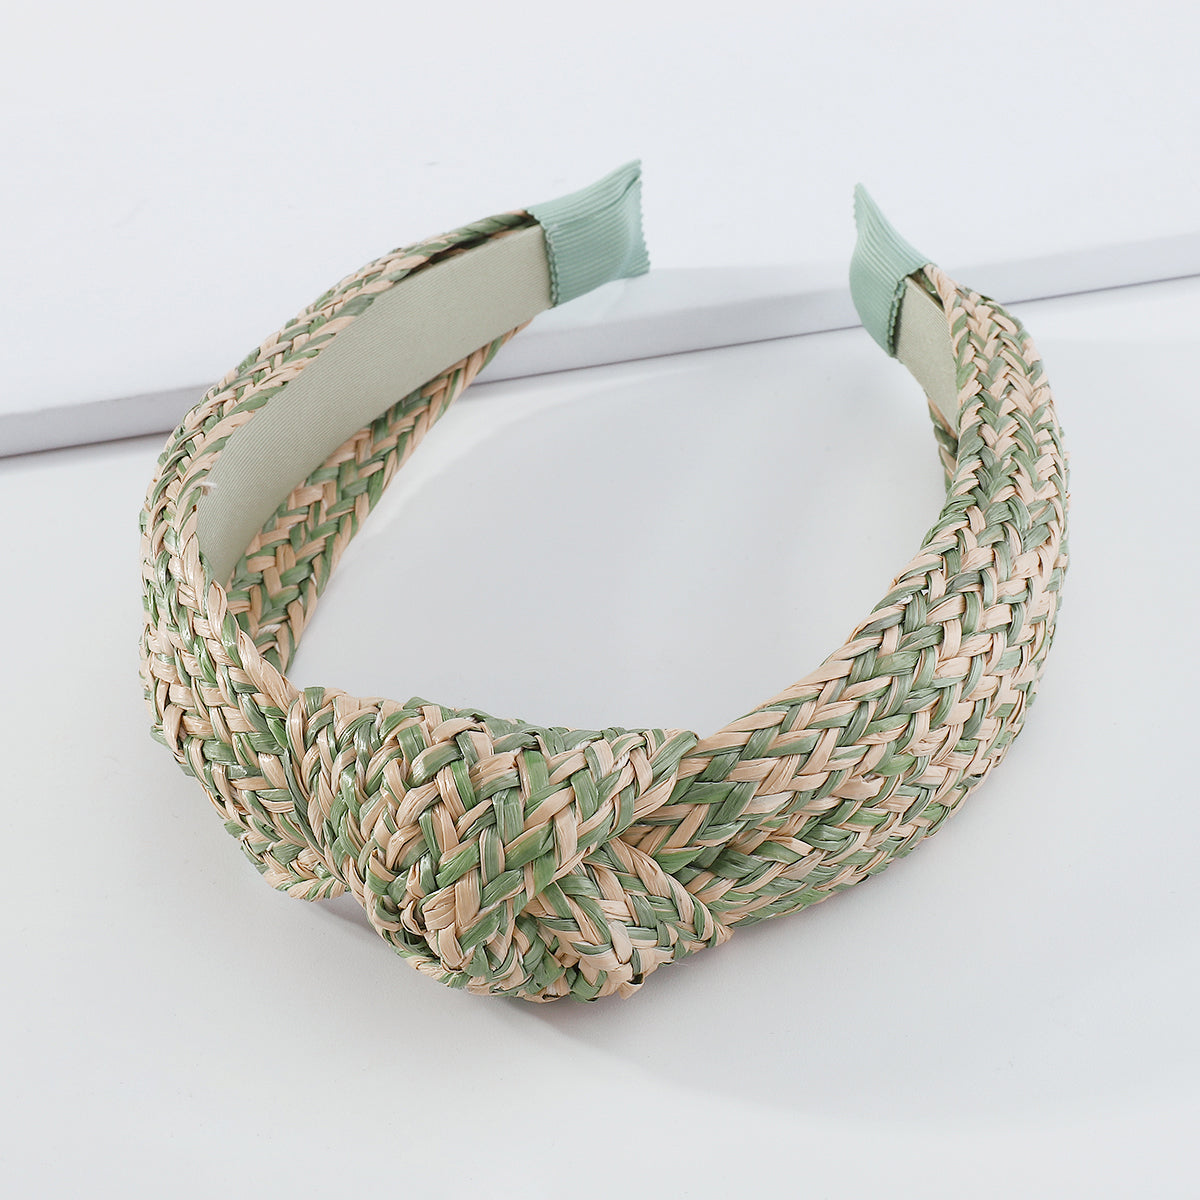 Summer Straw Weaving Top Knotted Headband medyjewelry